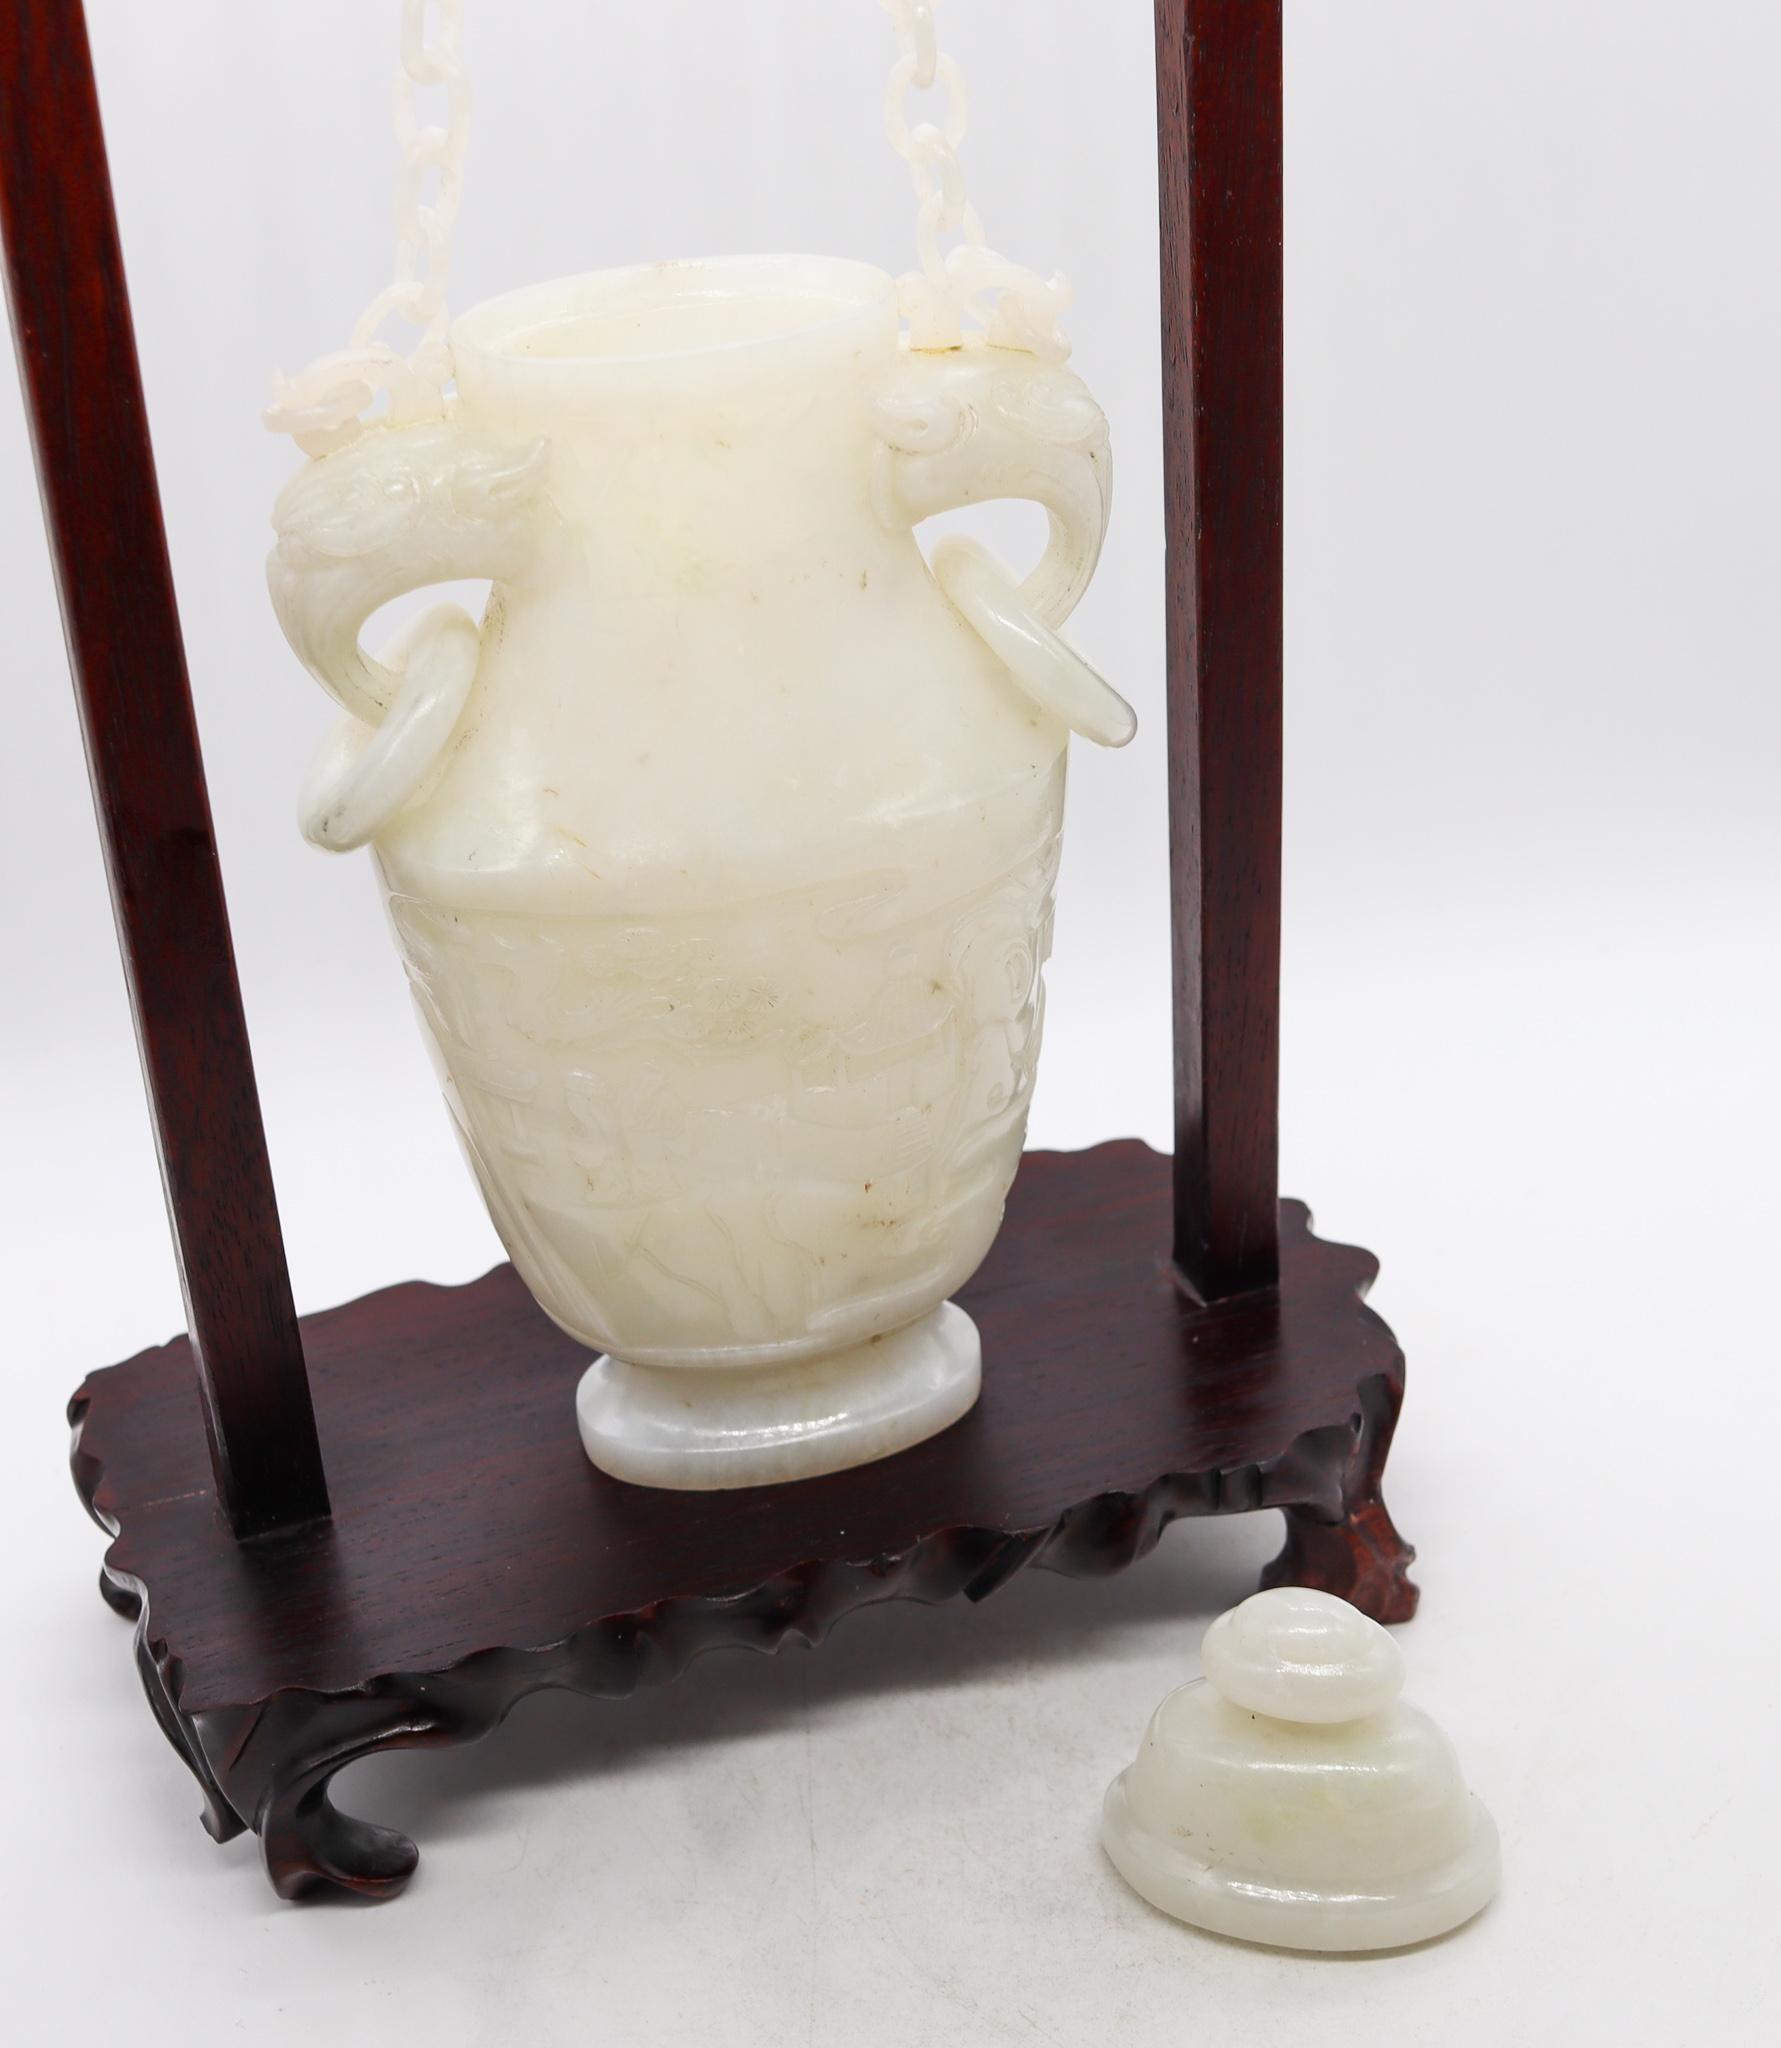 Hand-Carved China Qing Dynasty 1890 Amphora Jar with Chains in White Jadeite Jade with Wood